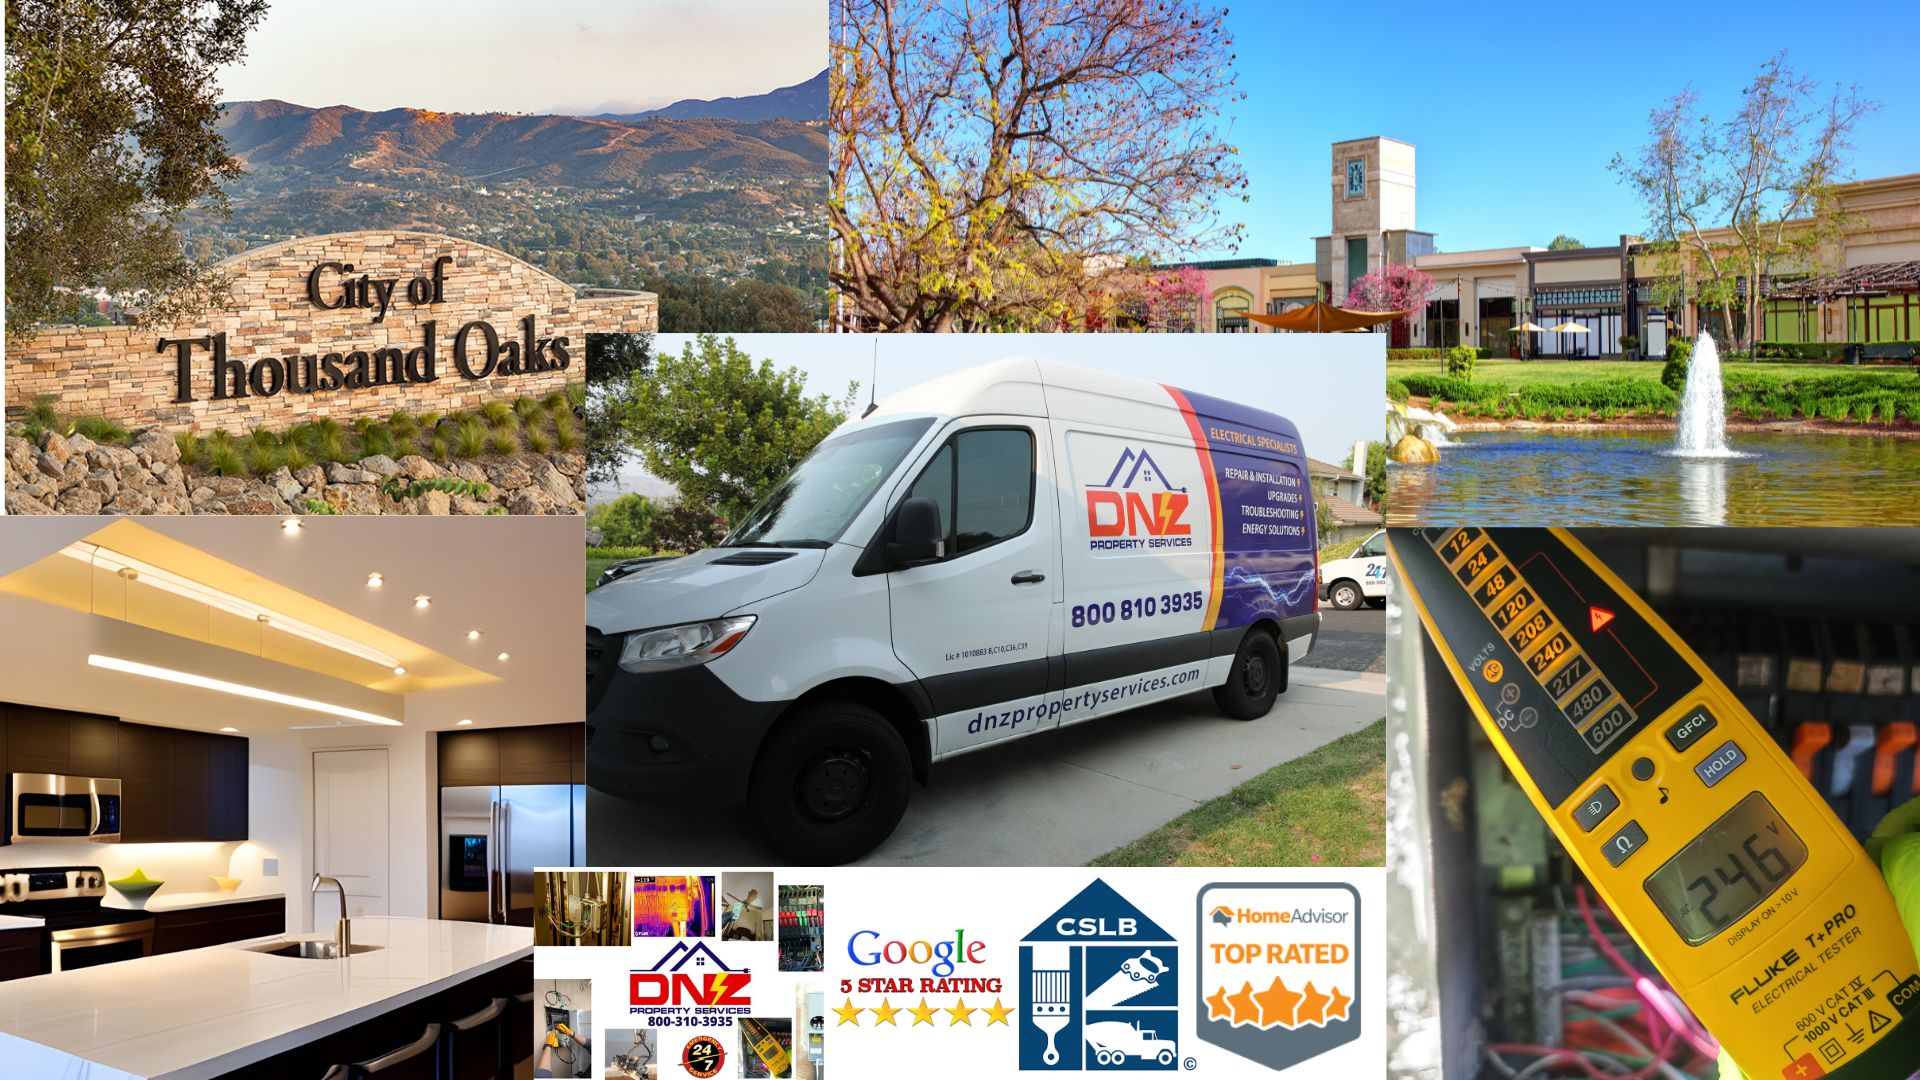 Thousand oaks electrician services provided by DNZ Property Services, expert electricians